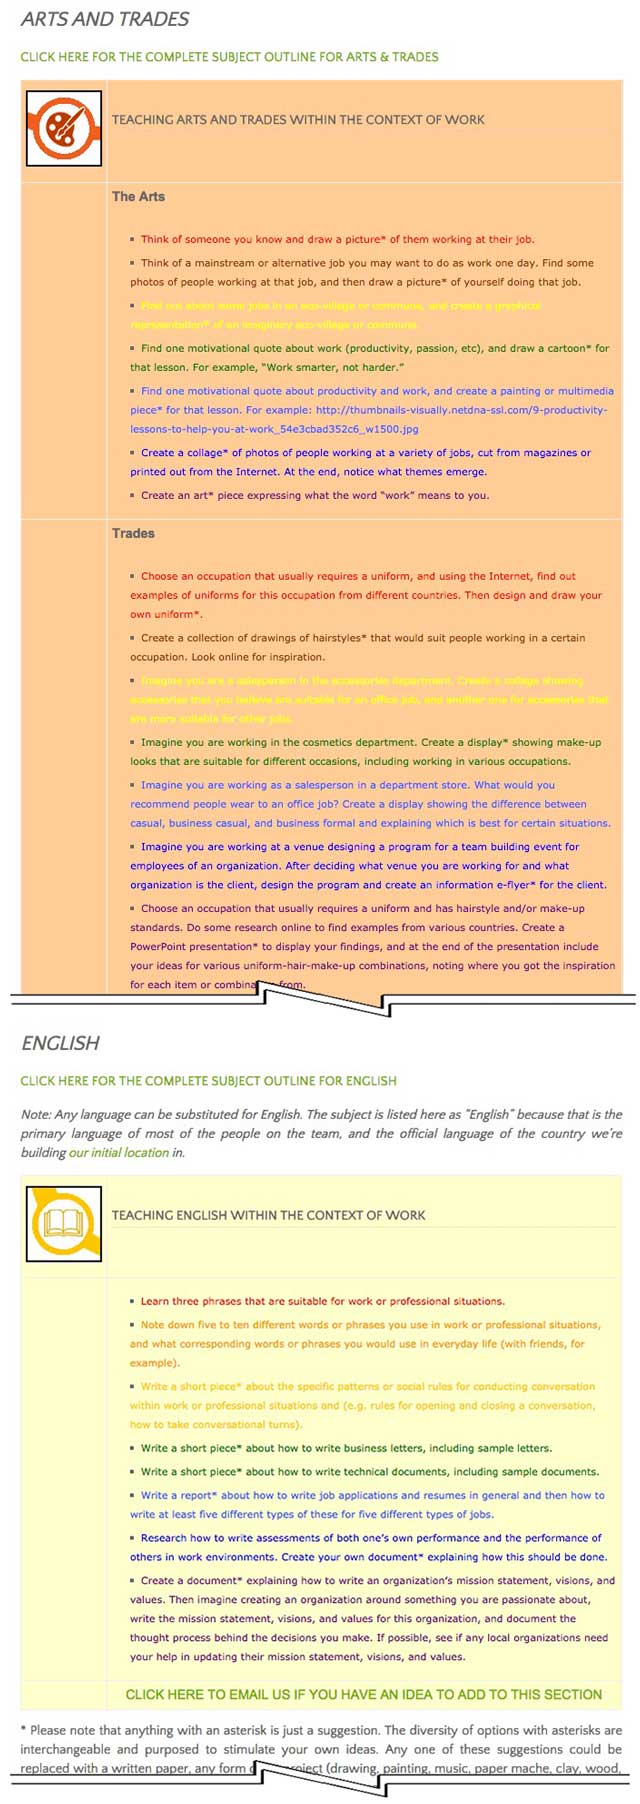 Making a Global Difference - This last week the core team transferred the first 25% of the written content for the Work Lesson Plan to the website, as you see here. This lesson plan is purposed to teach all subjects, to all learning levels, in any learning environment, using the central theme of “Work.”